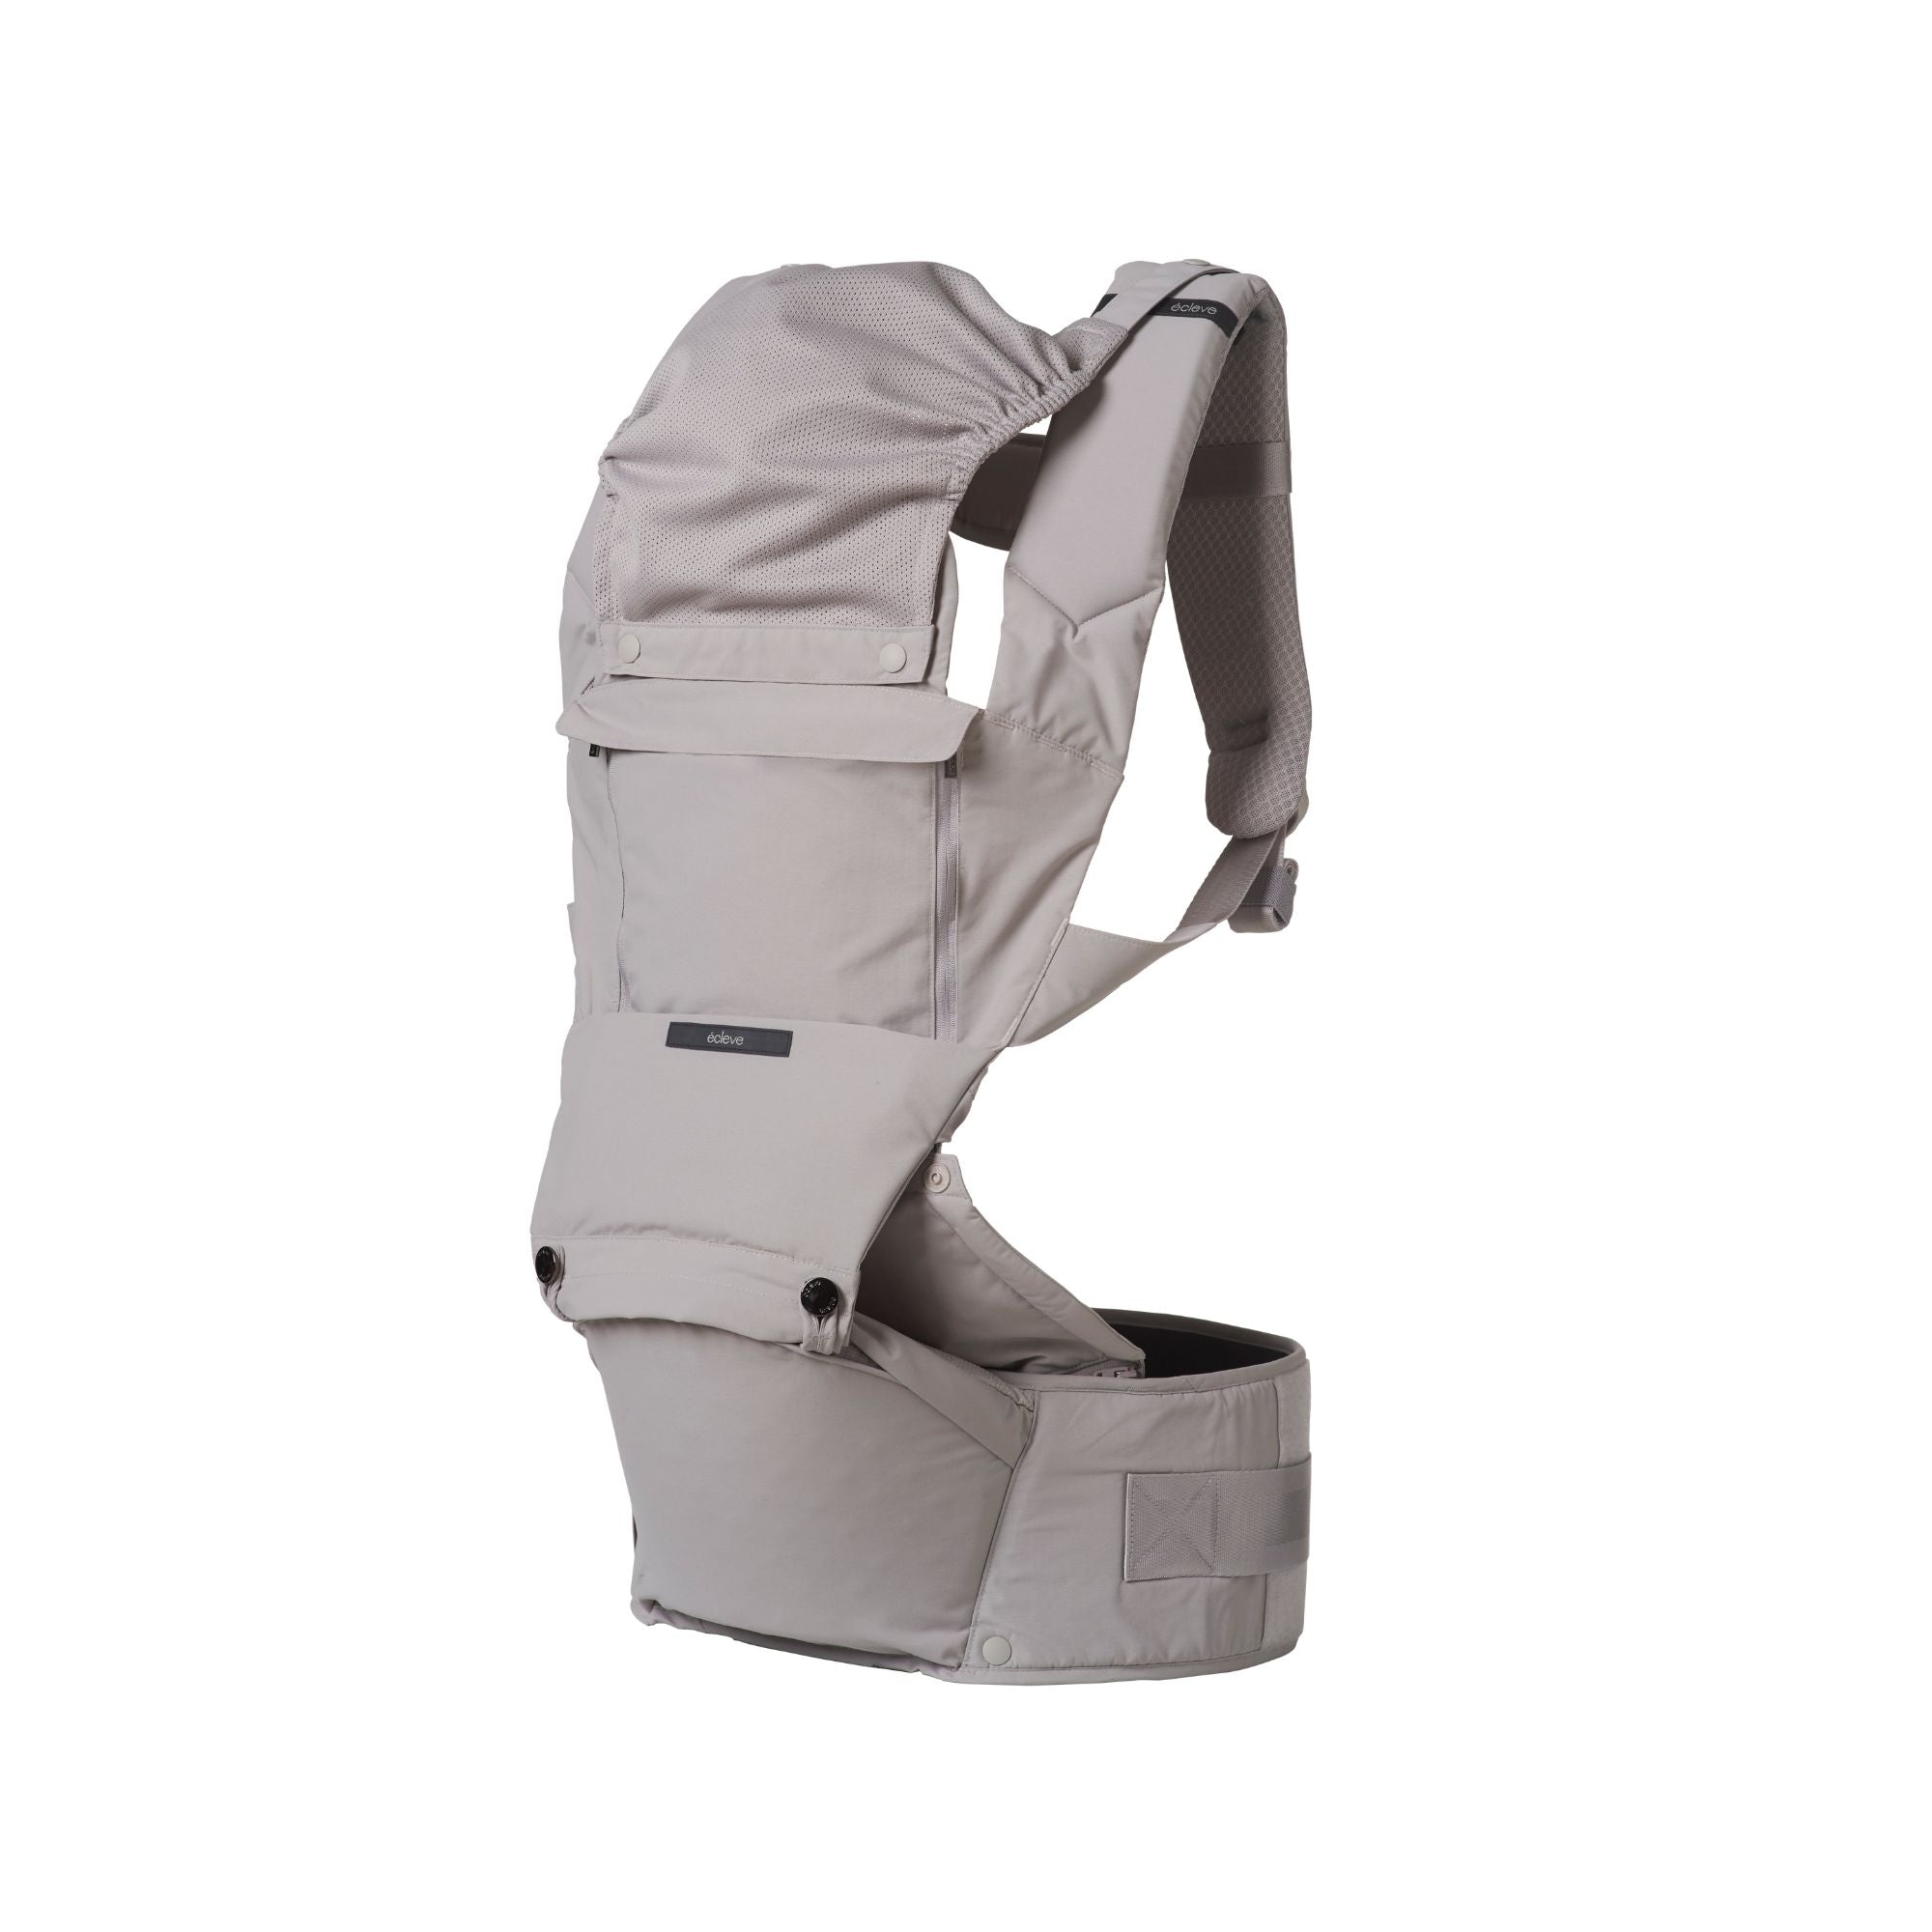 ECLEVE Ultimate Comfort Hip Seat Carrier